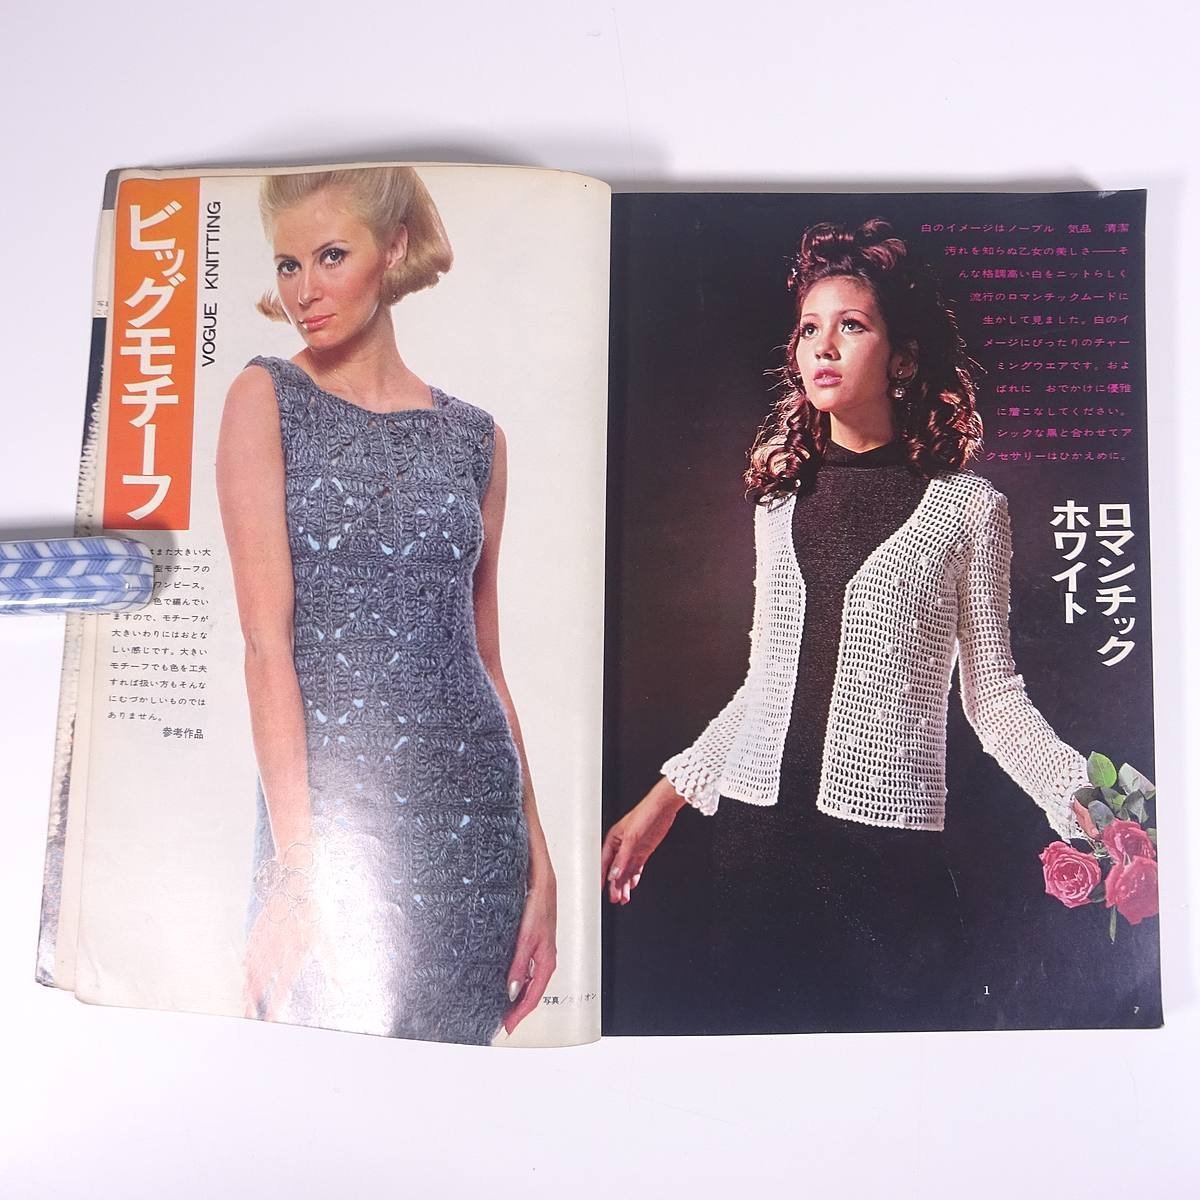  happy hand .. design special collection * crochet needle compilation Japan Vogue company 1969 large book@ handicrafts knitting .. thing sweater shawl stole One-piece another 